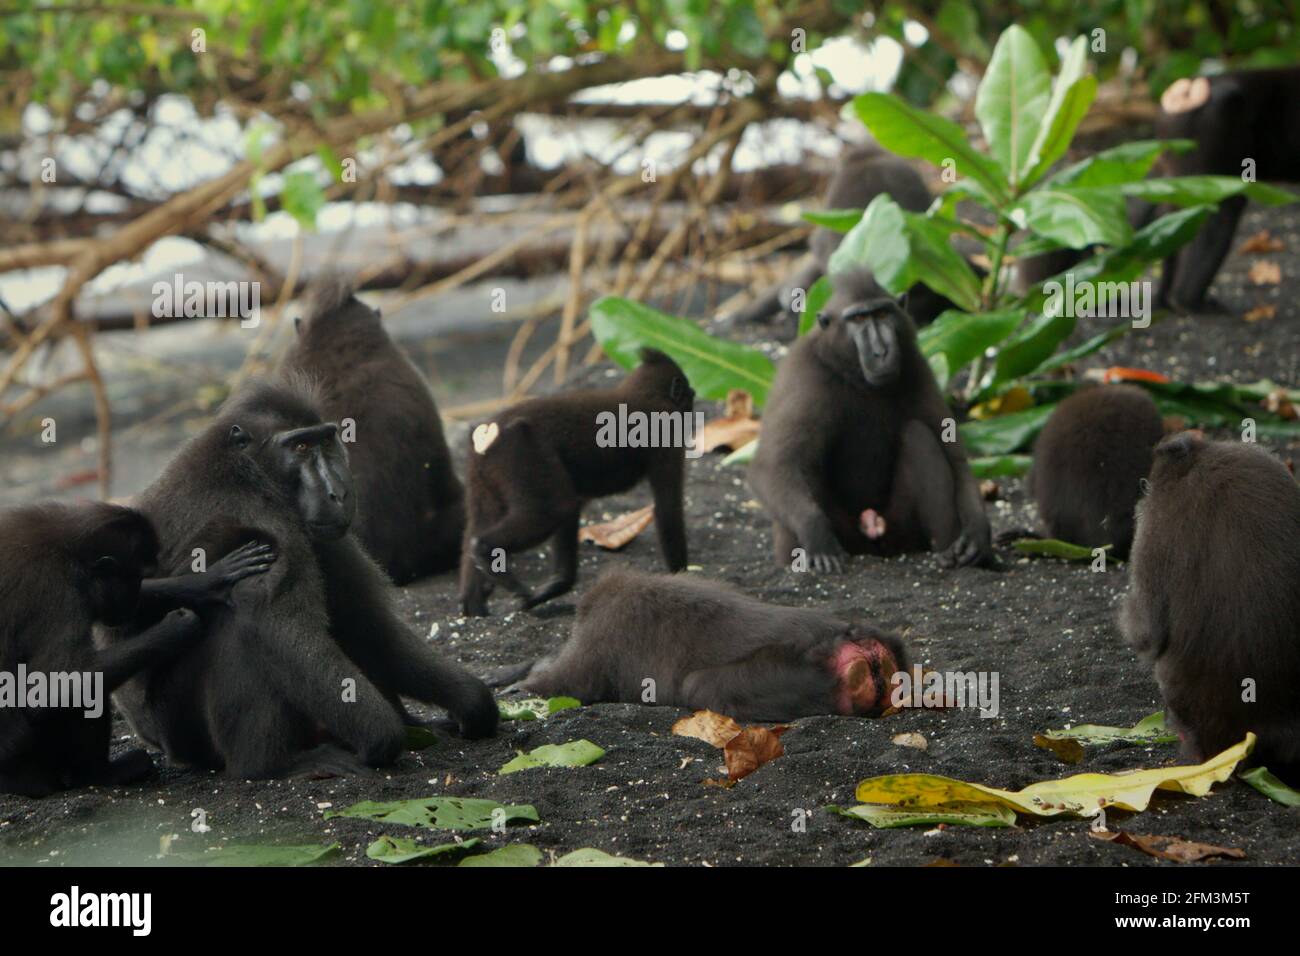 Crested macaques in social activity, on the beach of Tangkoko forest, North Sulawesi, Indonesia. In 'connectedness' personality factor, a crested macaque male is identified by its 'diverse neighbor and grooming network, spatial position in the core of the group,' according to a team of scientists led by Christof Neumann in a scientific paper published in August 2013. Stock Photo